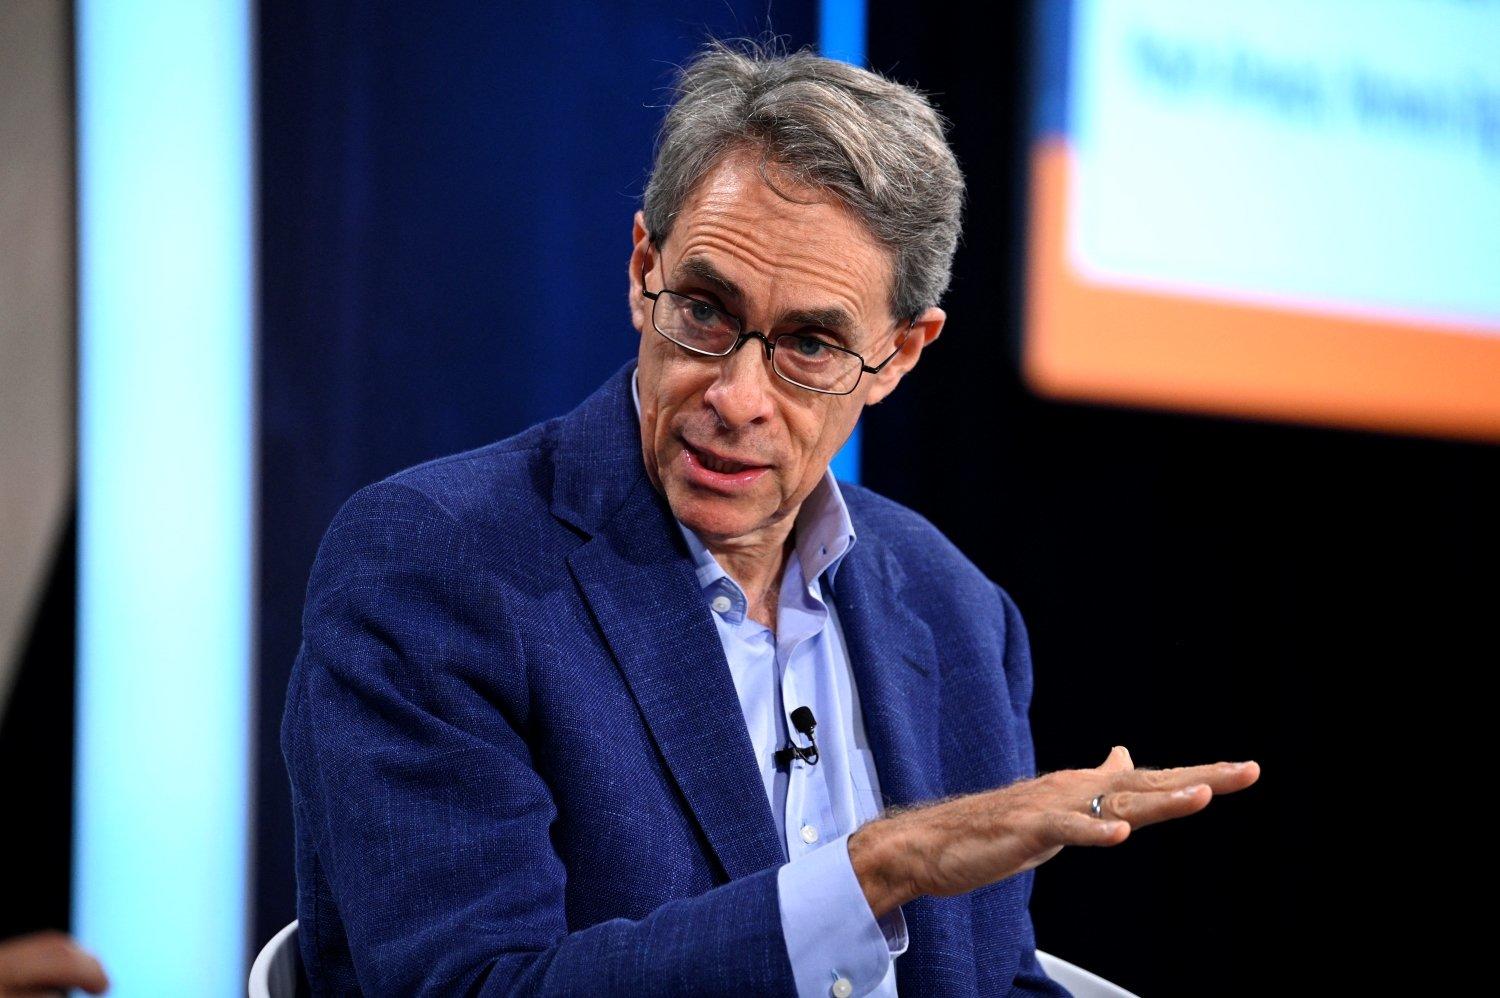 Kenneth Roth, former Executive Director of Human Rights Watch, speaks on stage during the 2022 Concordia Annual Summit in New York on 20 September 2022 (AFP)